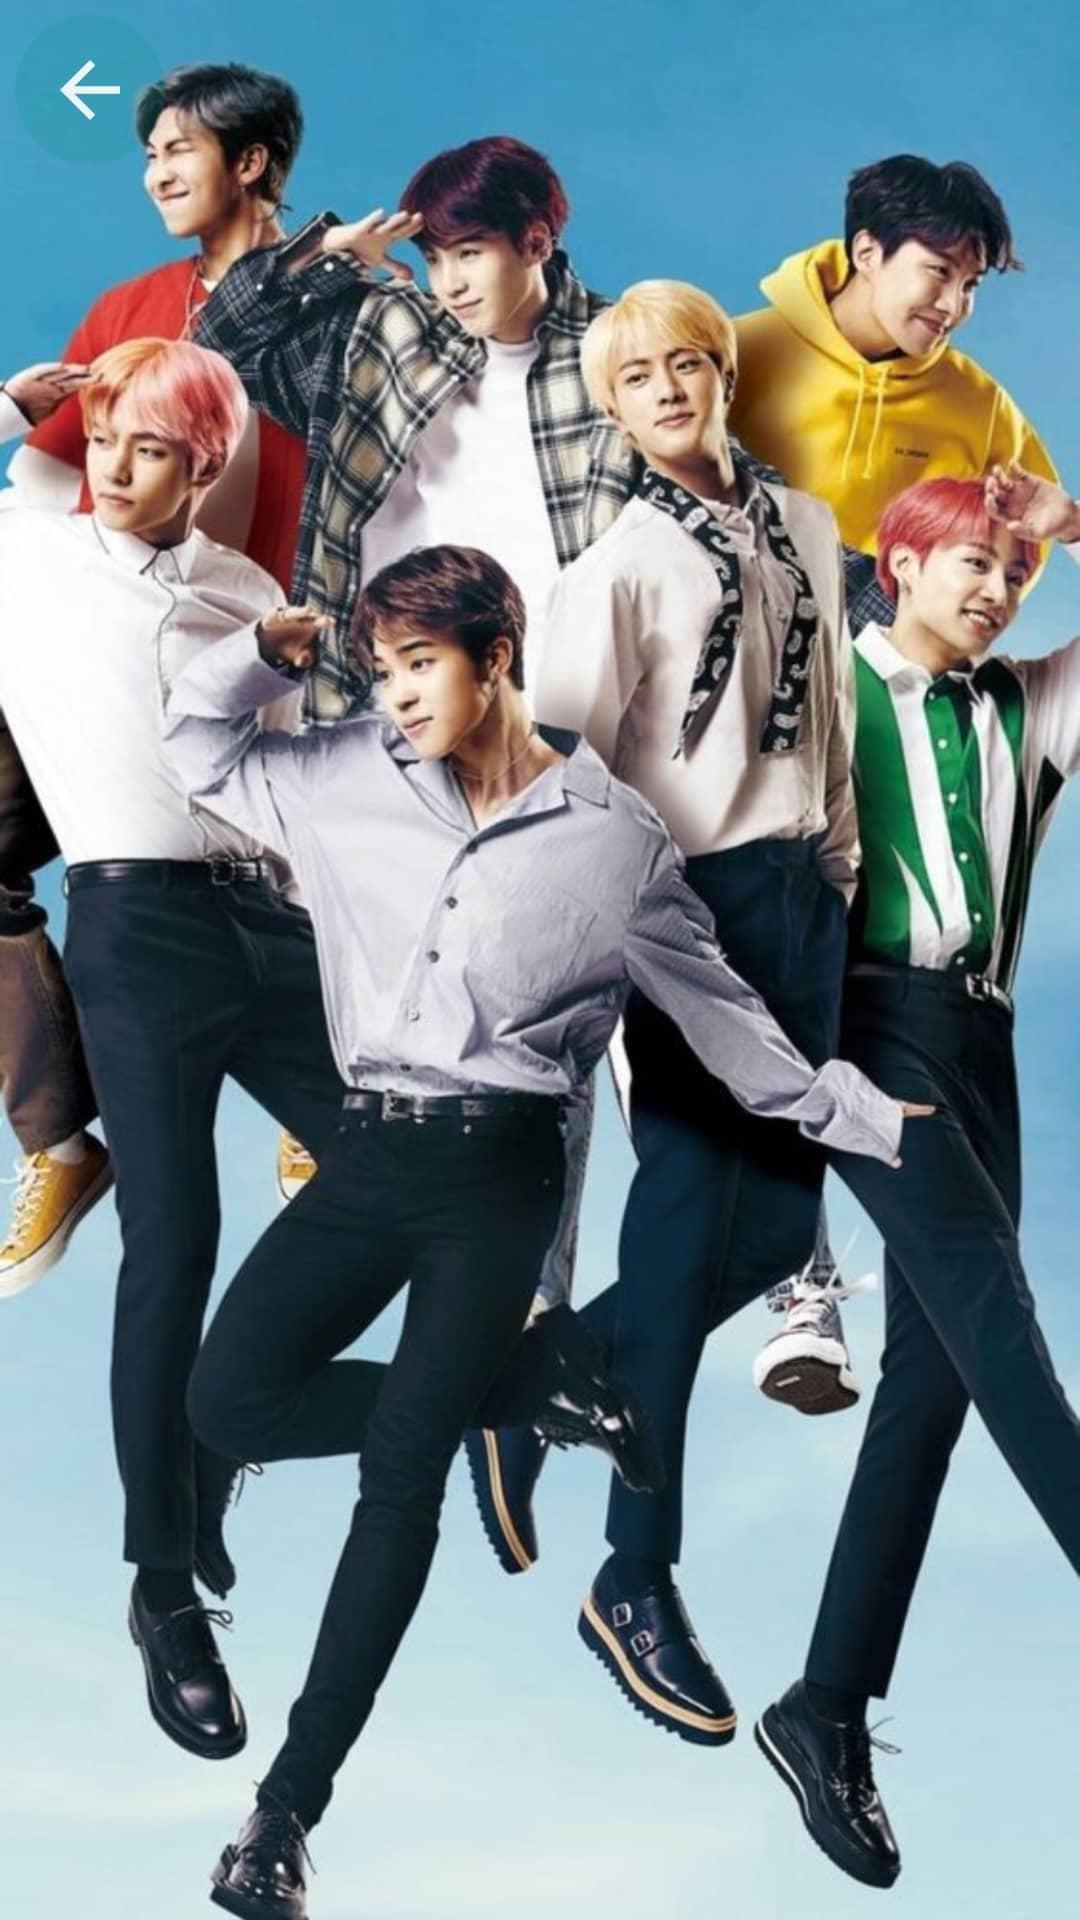 Bts 19 Wallpapers Top Free Bts 19 Backgrounds Wallpaperaccess